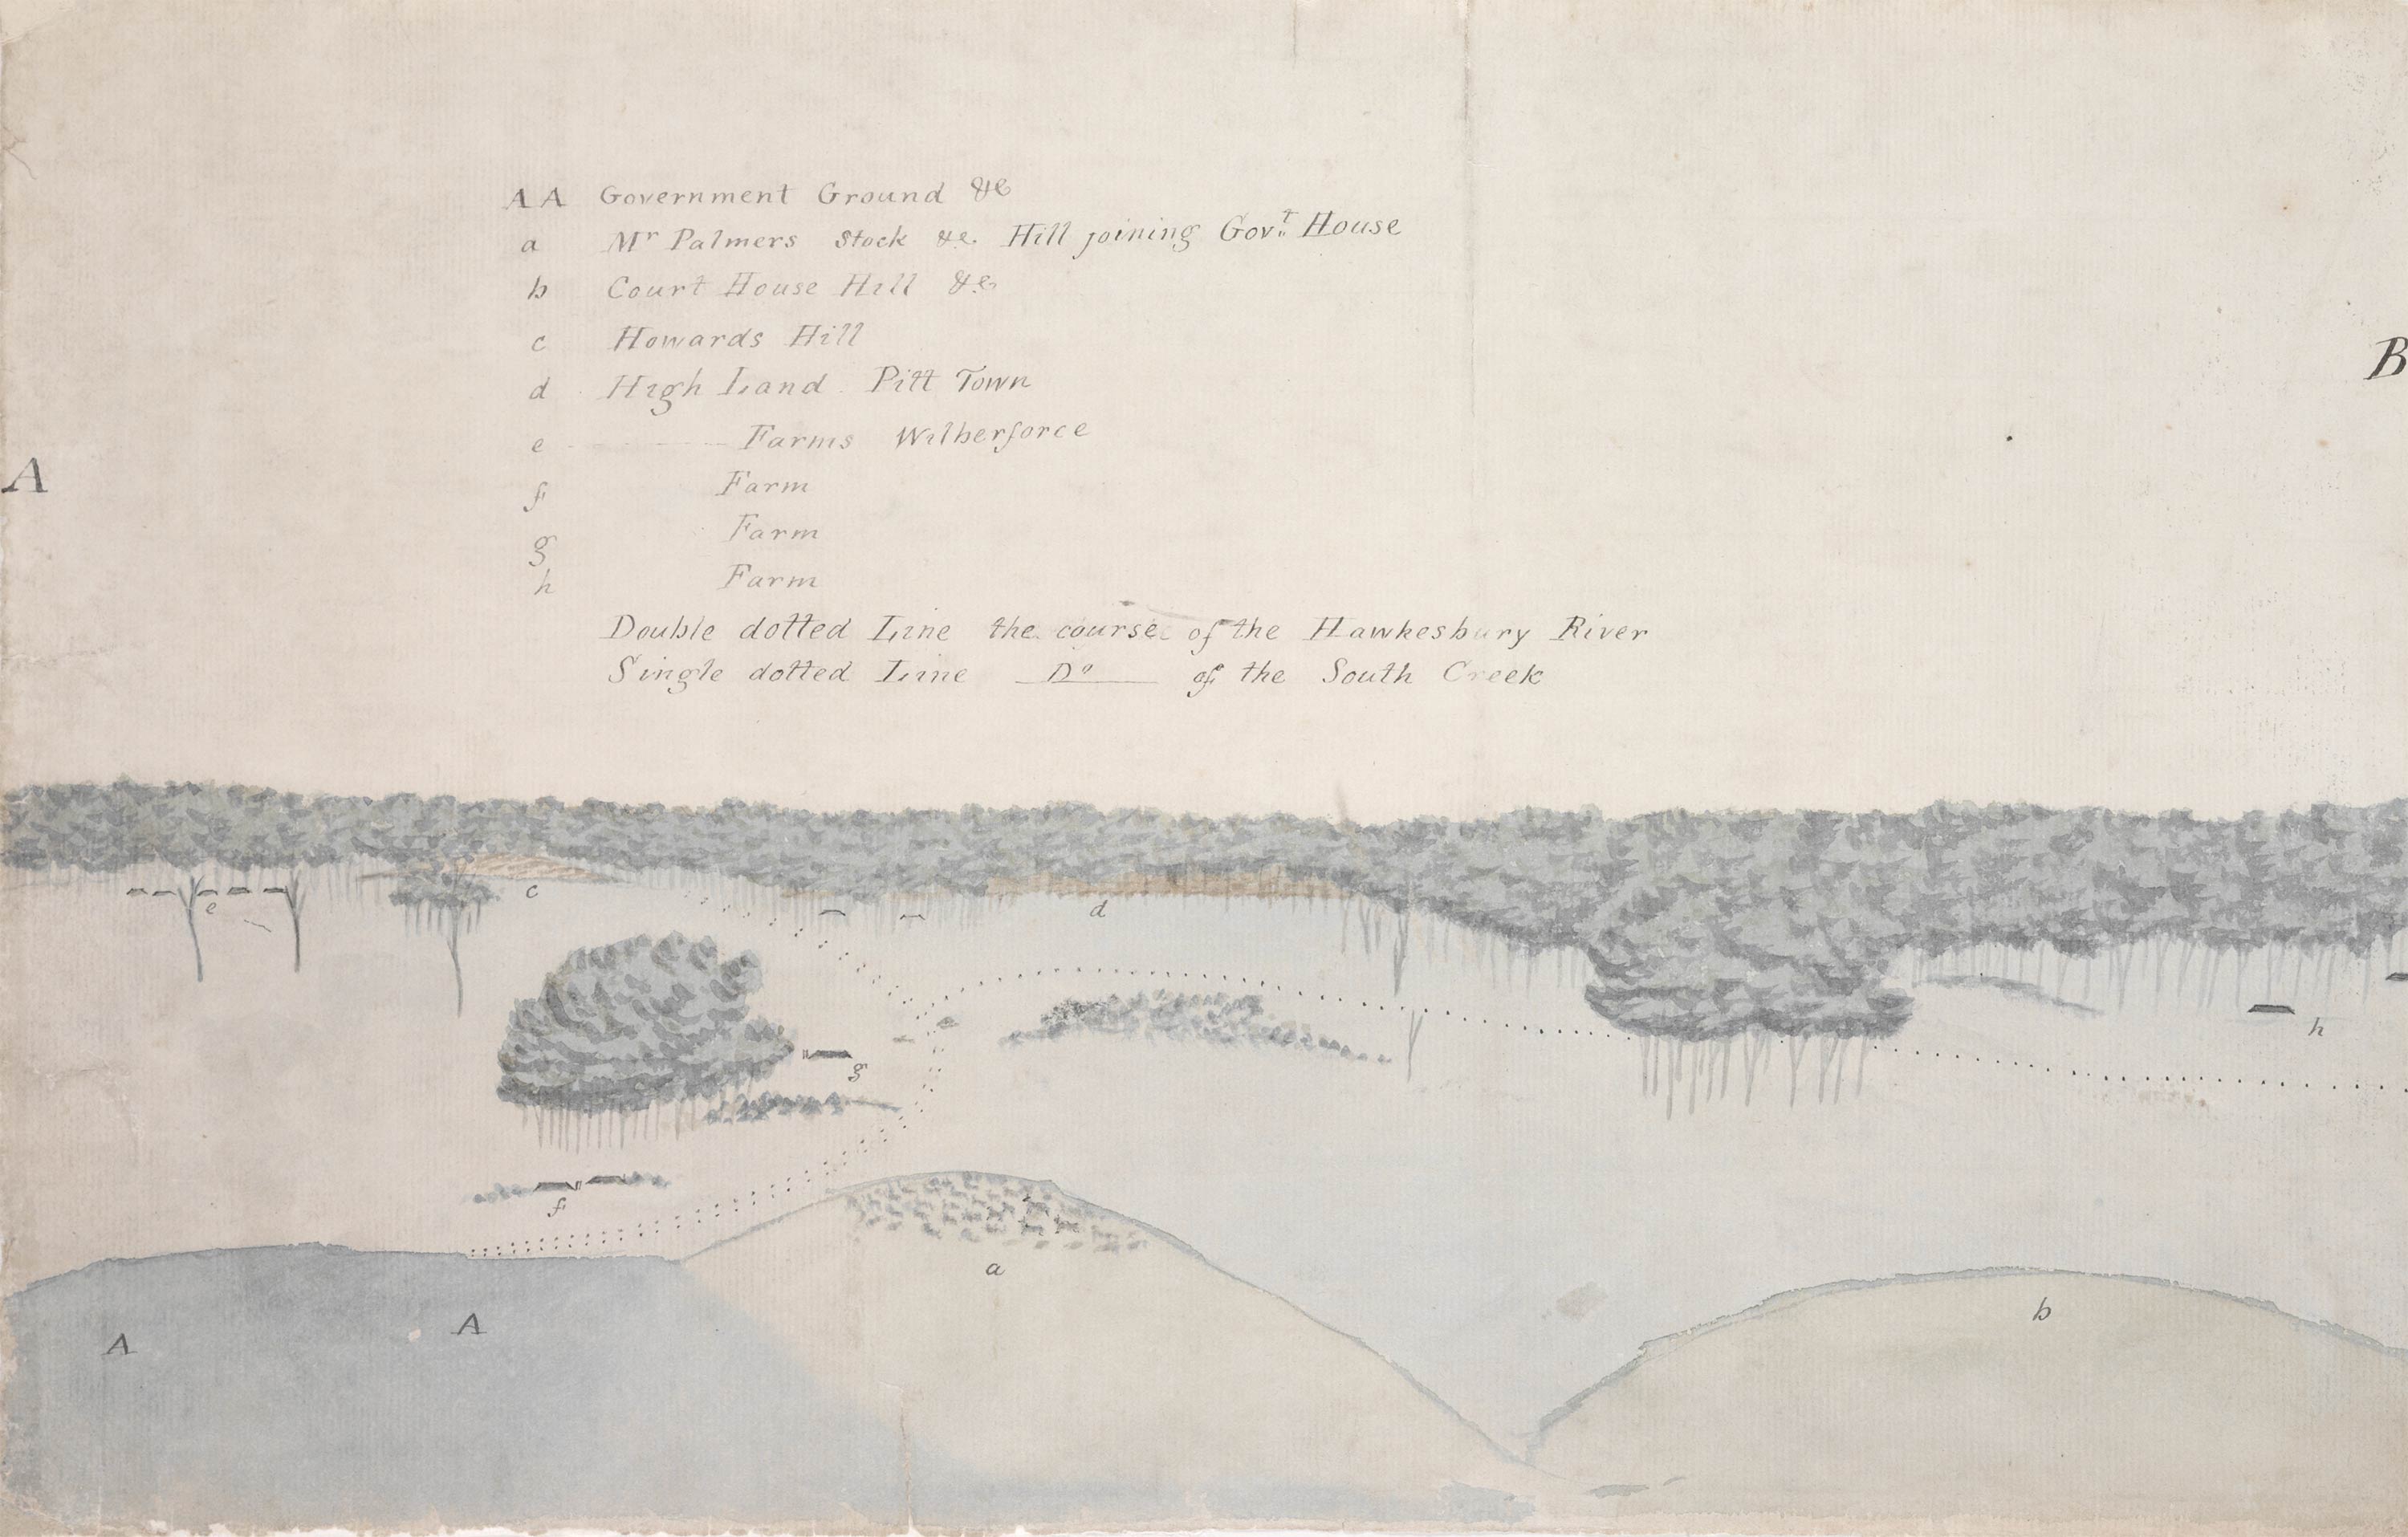 Sketch of the inundation in the neighborhood [sic] of Windsor taken on Sunday the 2nd of June 1816, Page 1